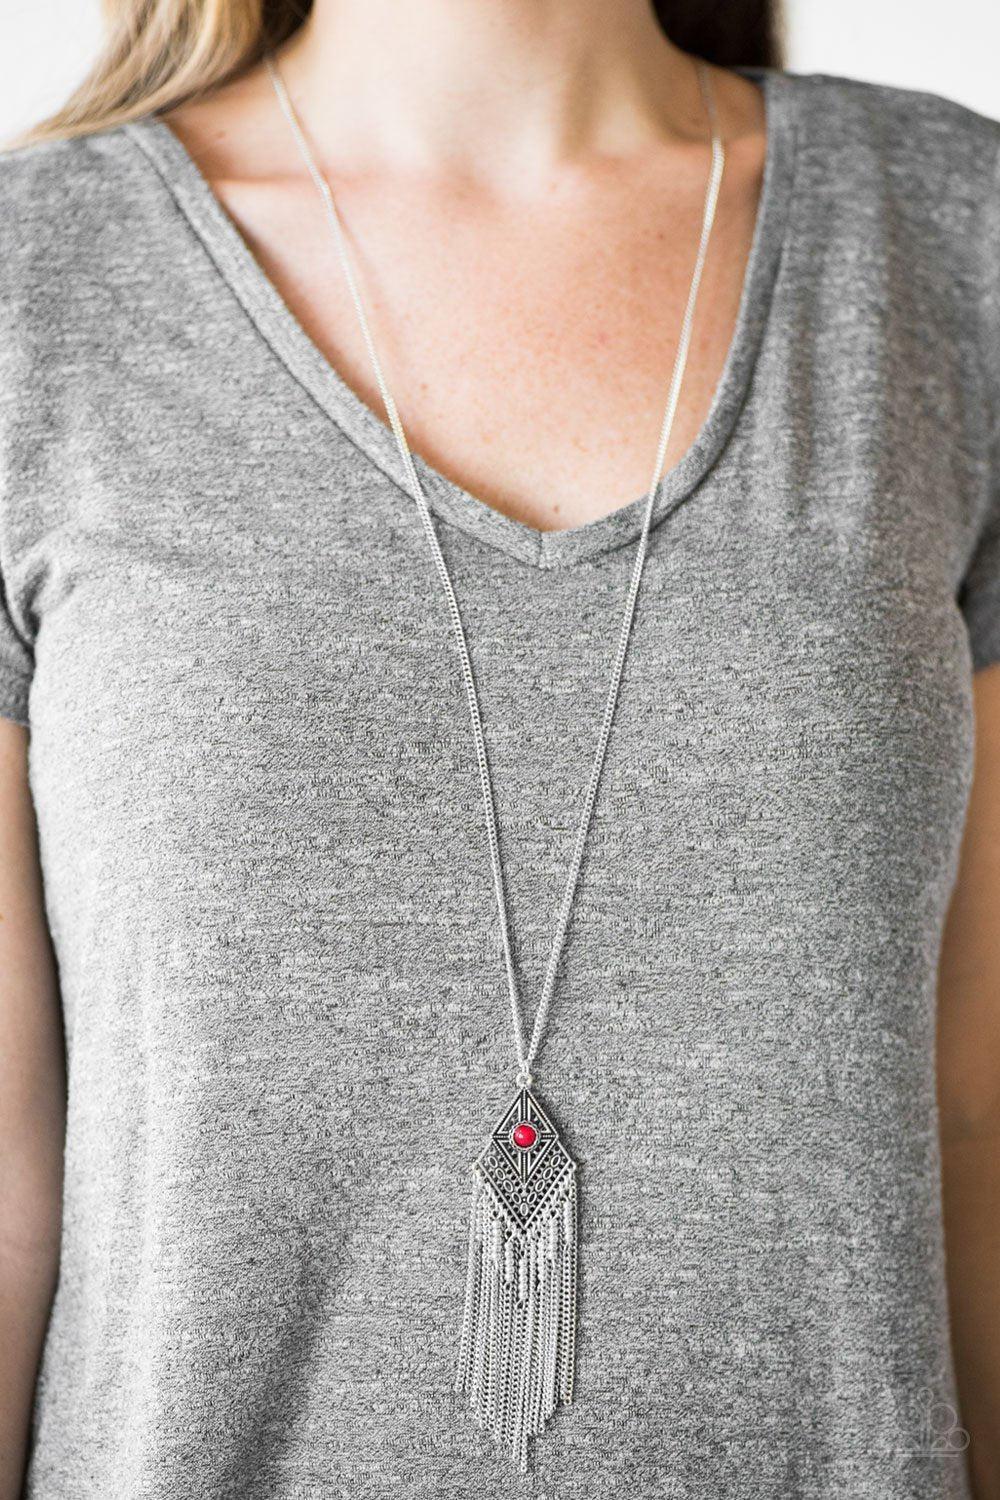 The Adventure Begins Red and Silver Necklace - Paparazzi Accessories-CarasShop.com - $5 Jewelry by Cara Jewels